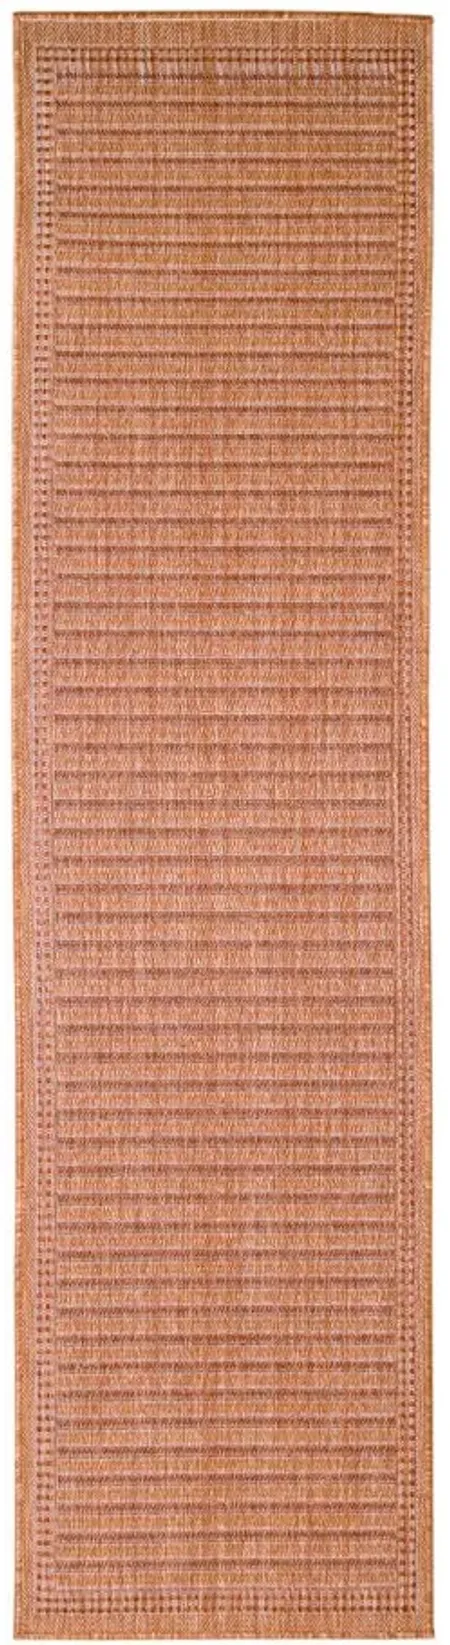 Liora Manne Malibu Simple Border Indoor/Outdoor Runner Rug in Clay by Trans-Ocean Import Co Inc